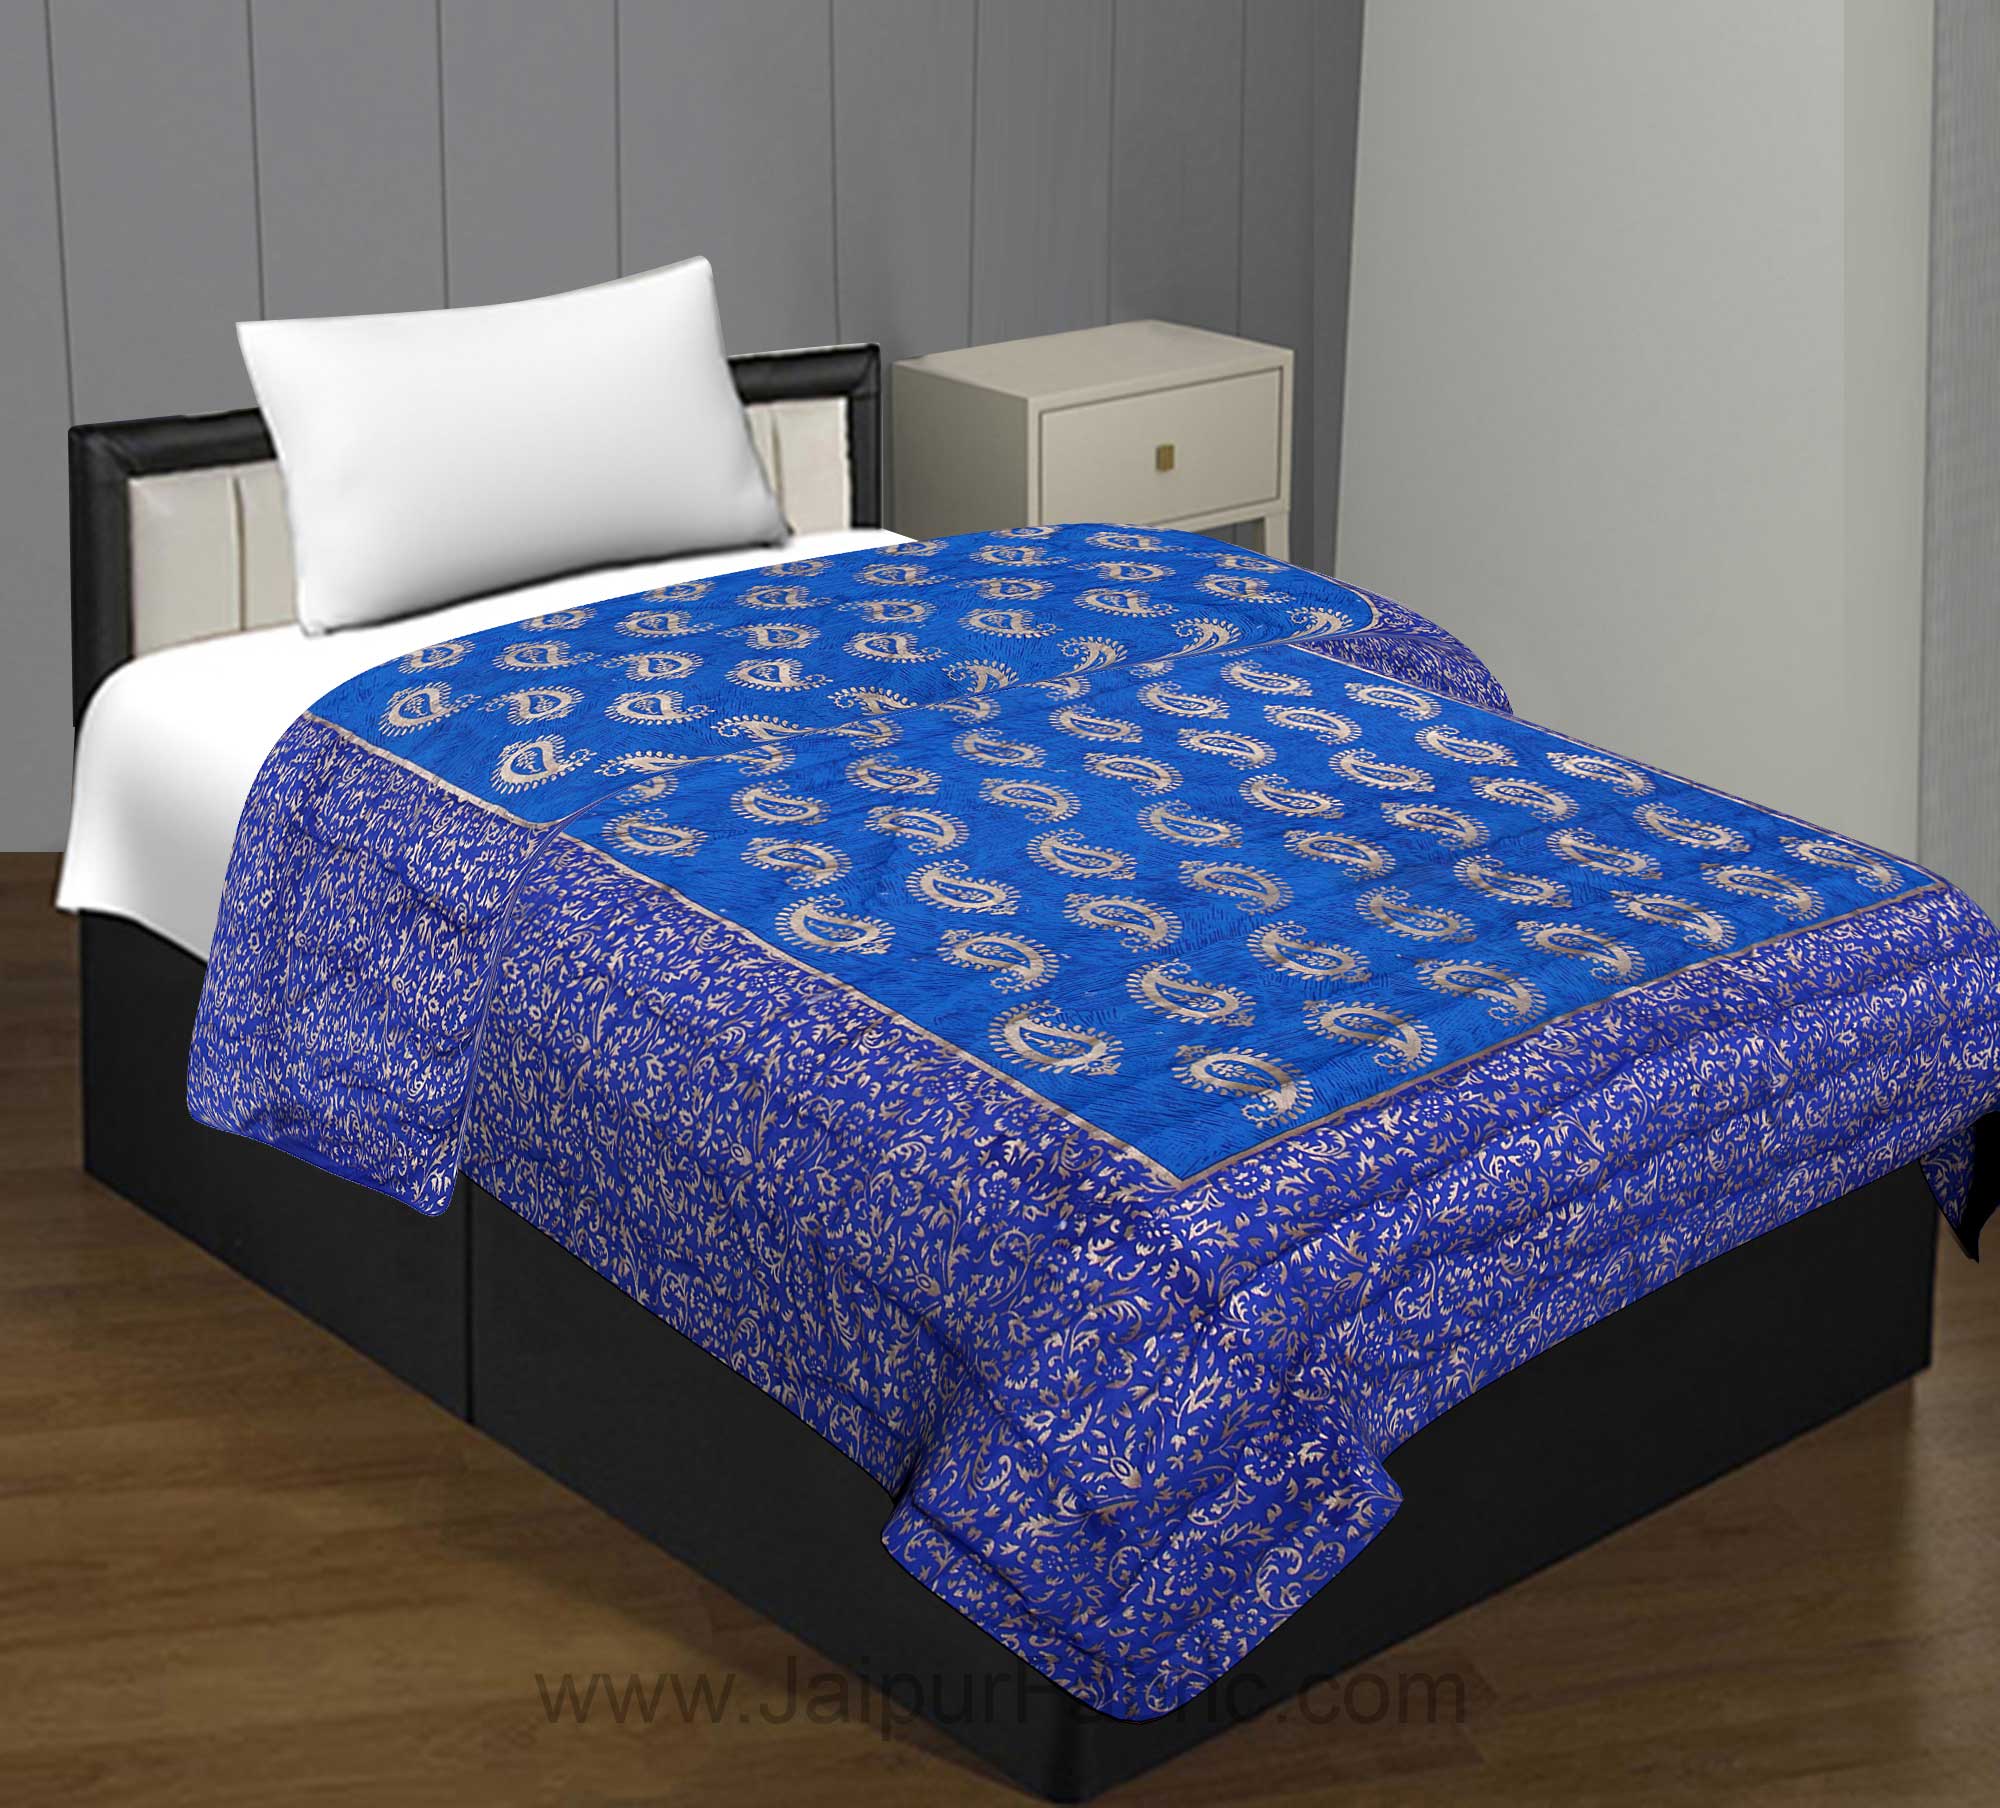 Jaipuri Printed Single Bed Razai Golden Blue and Sea Green with Paisley pattern